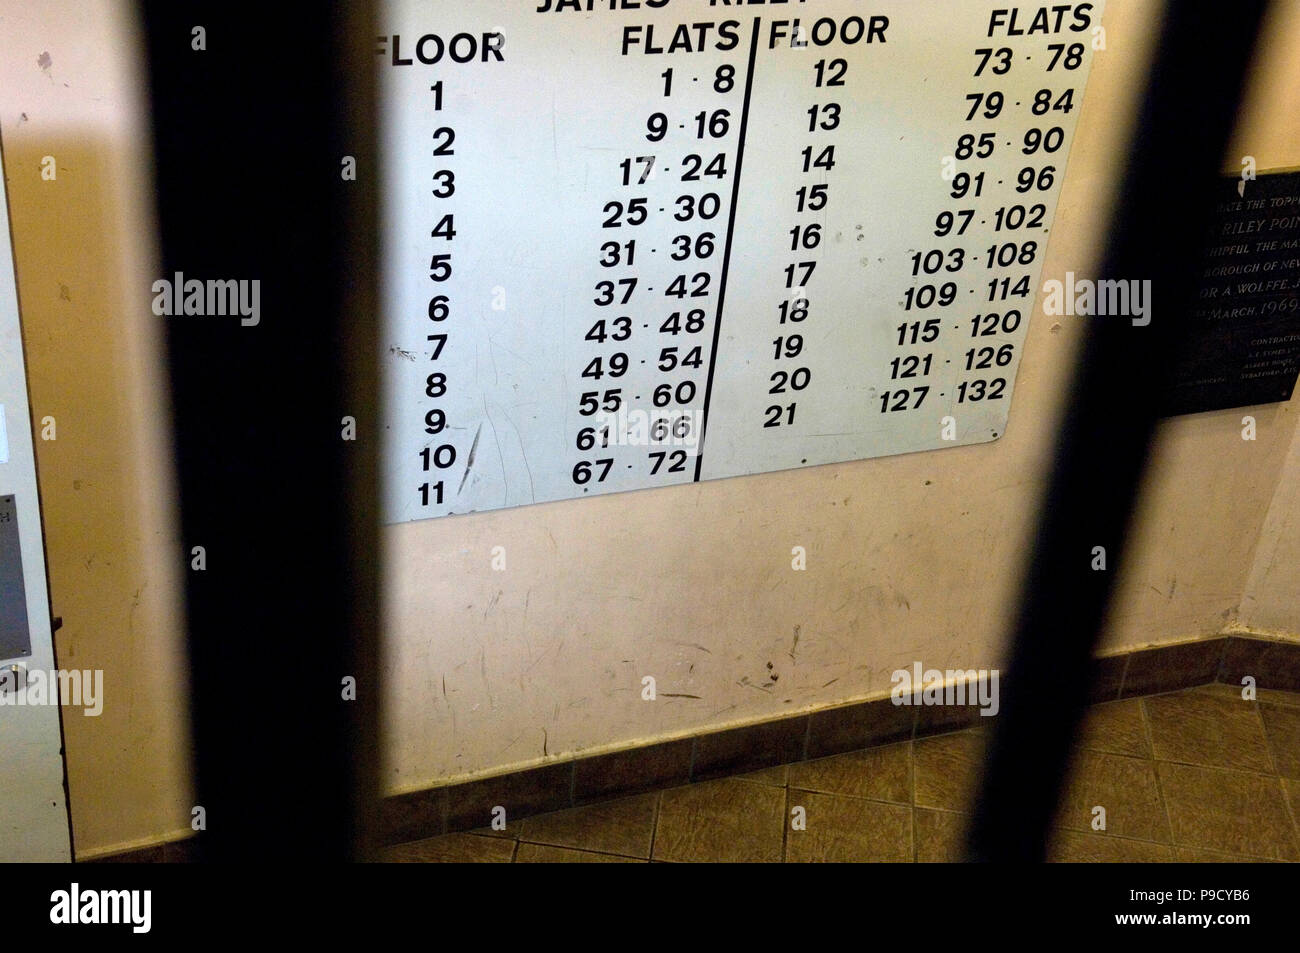 Blocks of flats floor and flat numbers Stock Photo